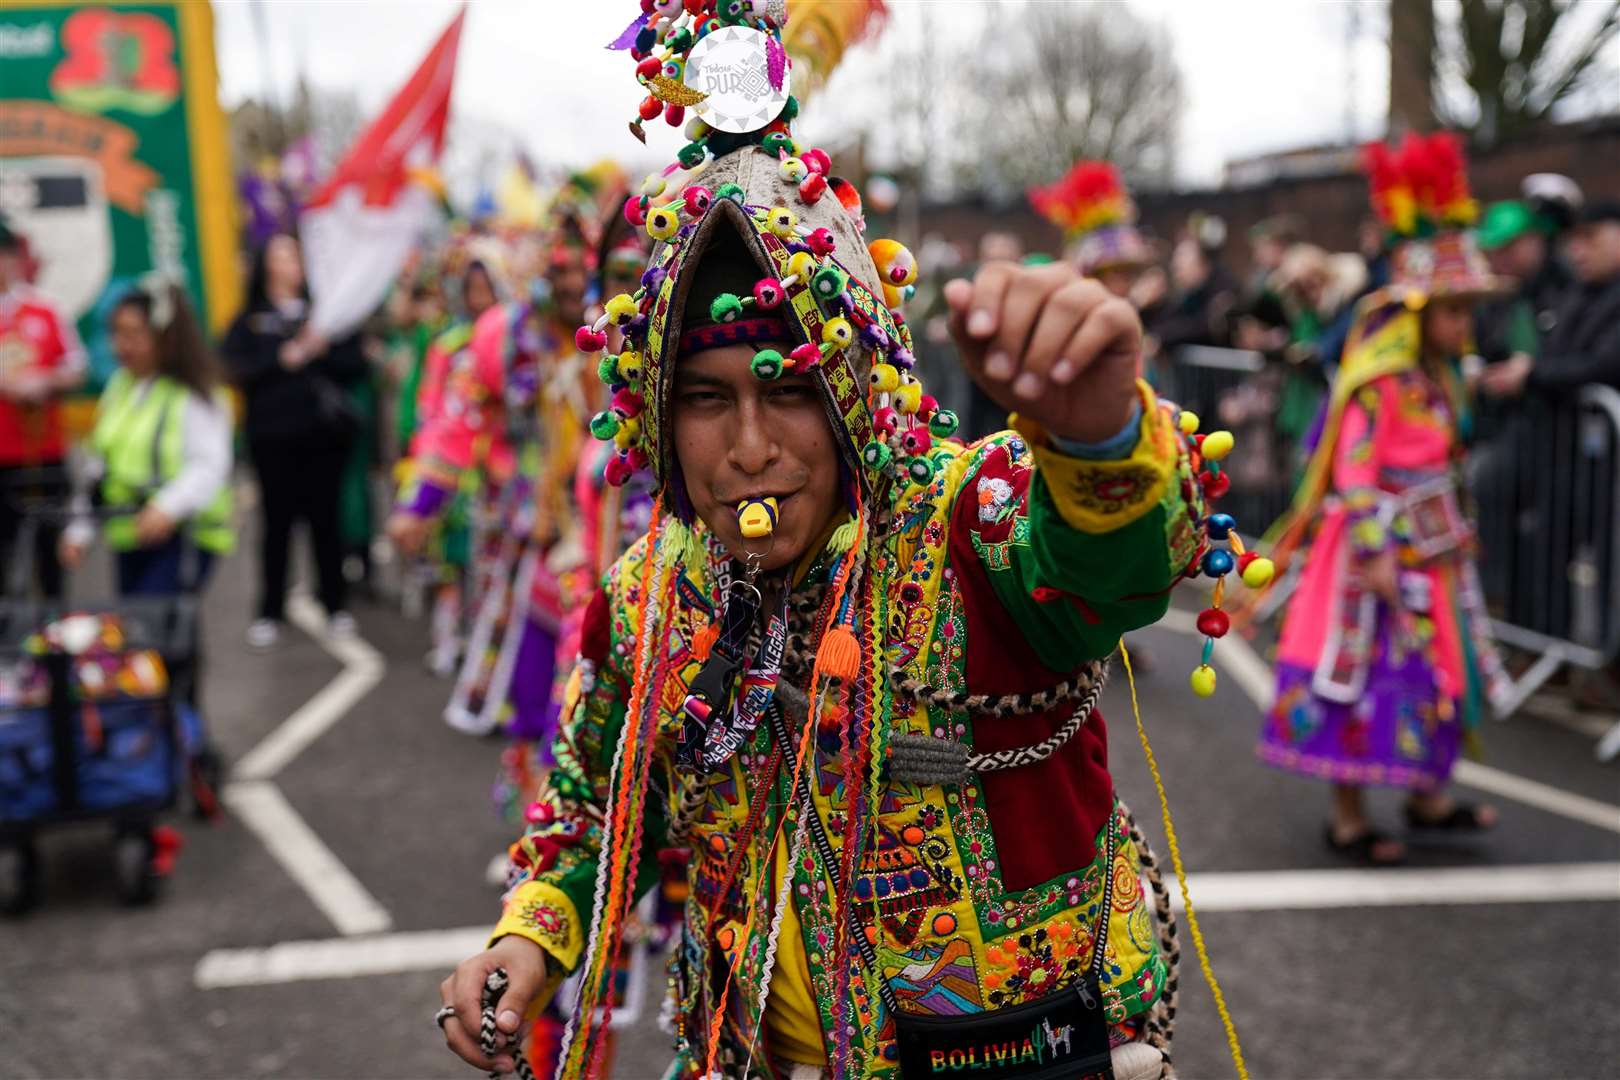 Elsewhere, in Birmingham, performers also took part in a St Patrick’s Day parade (Jacob King/PA)